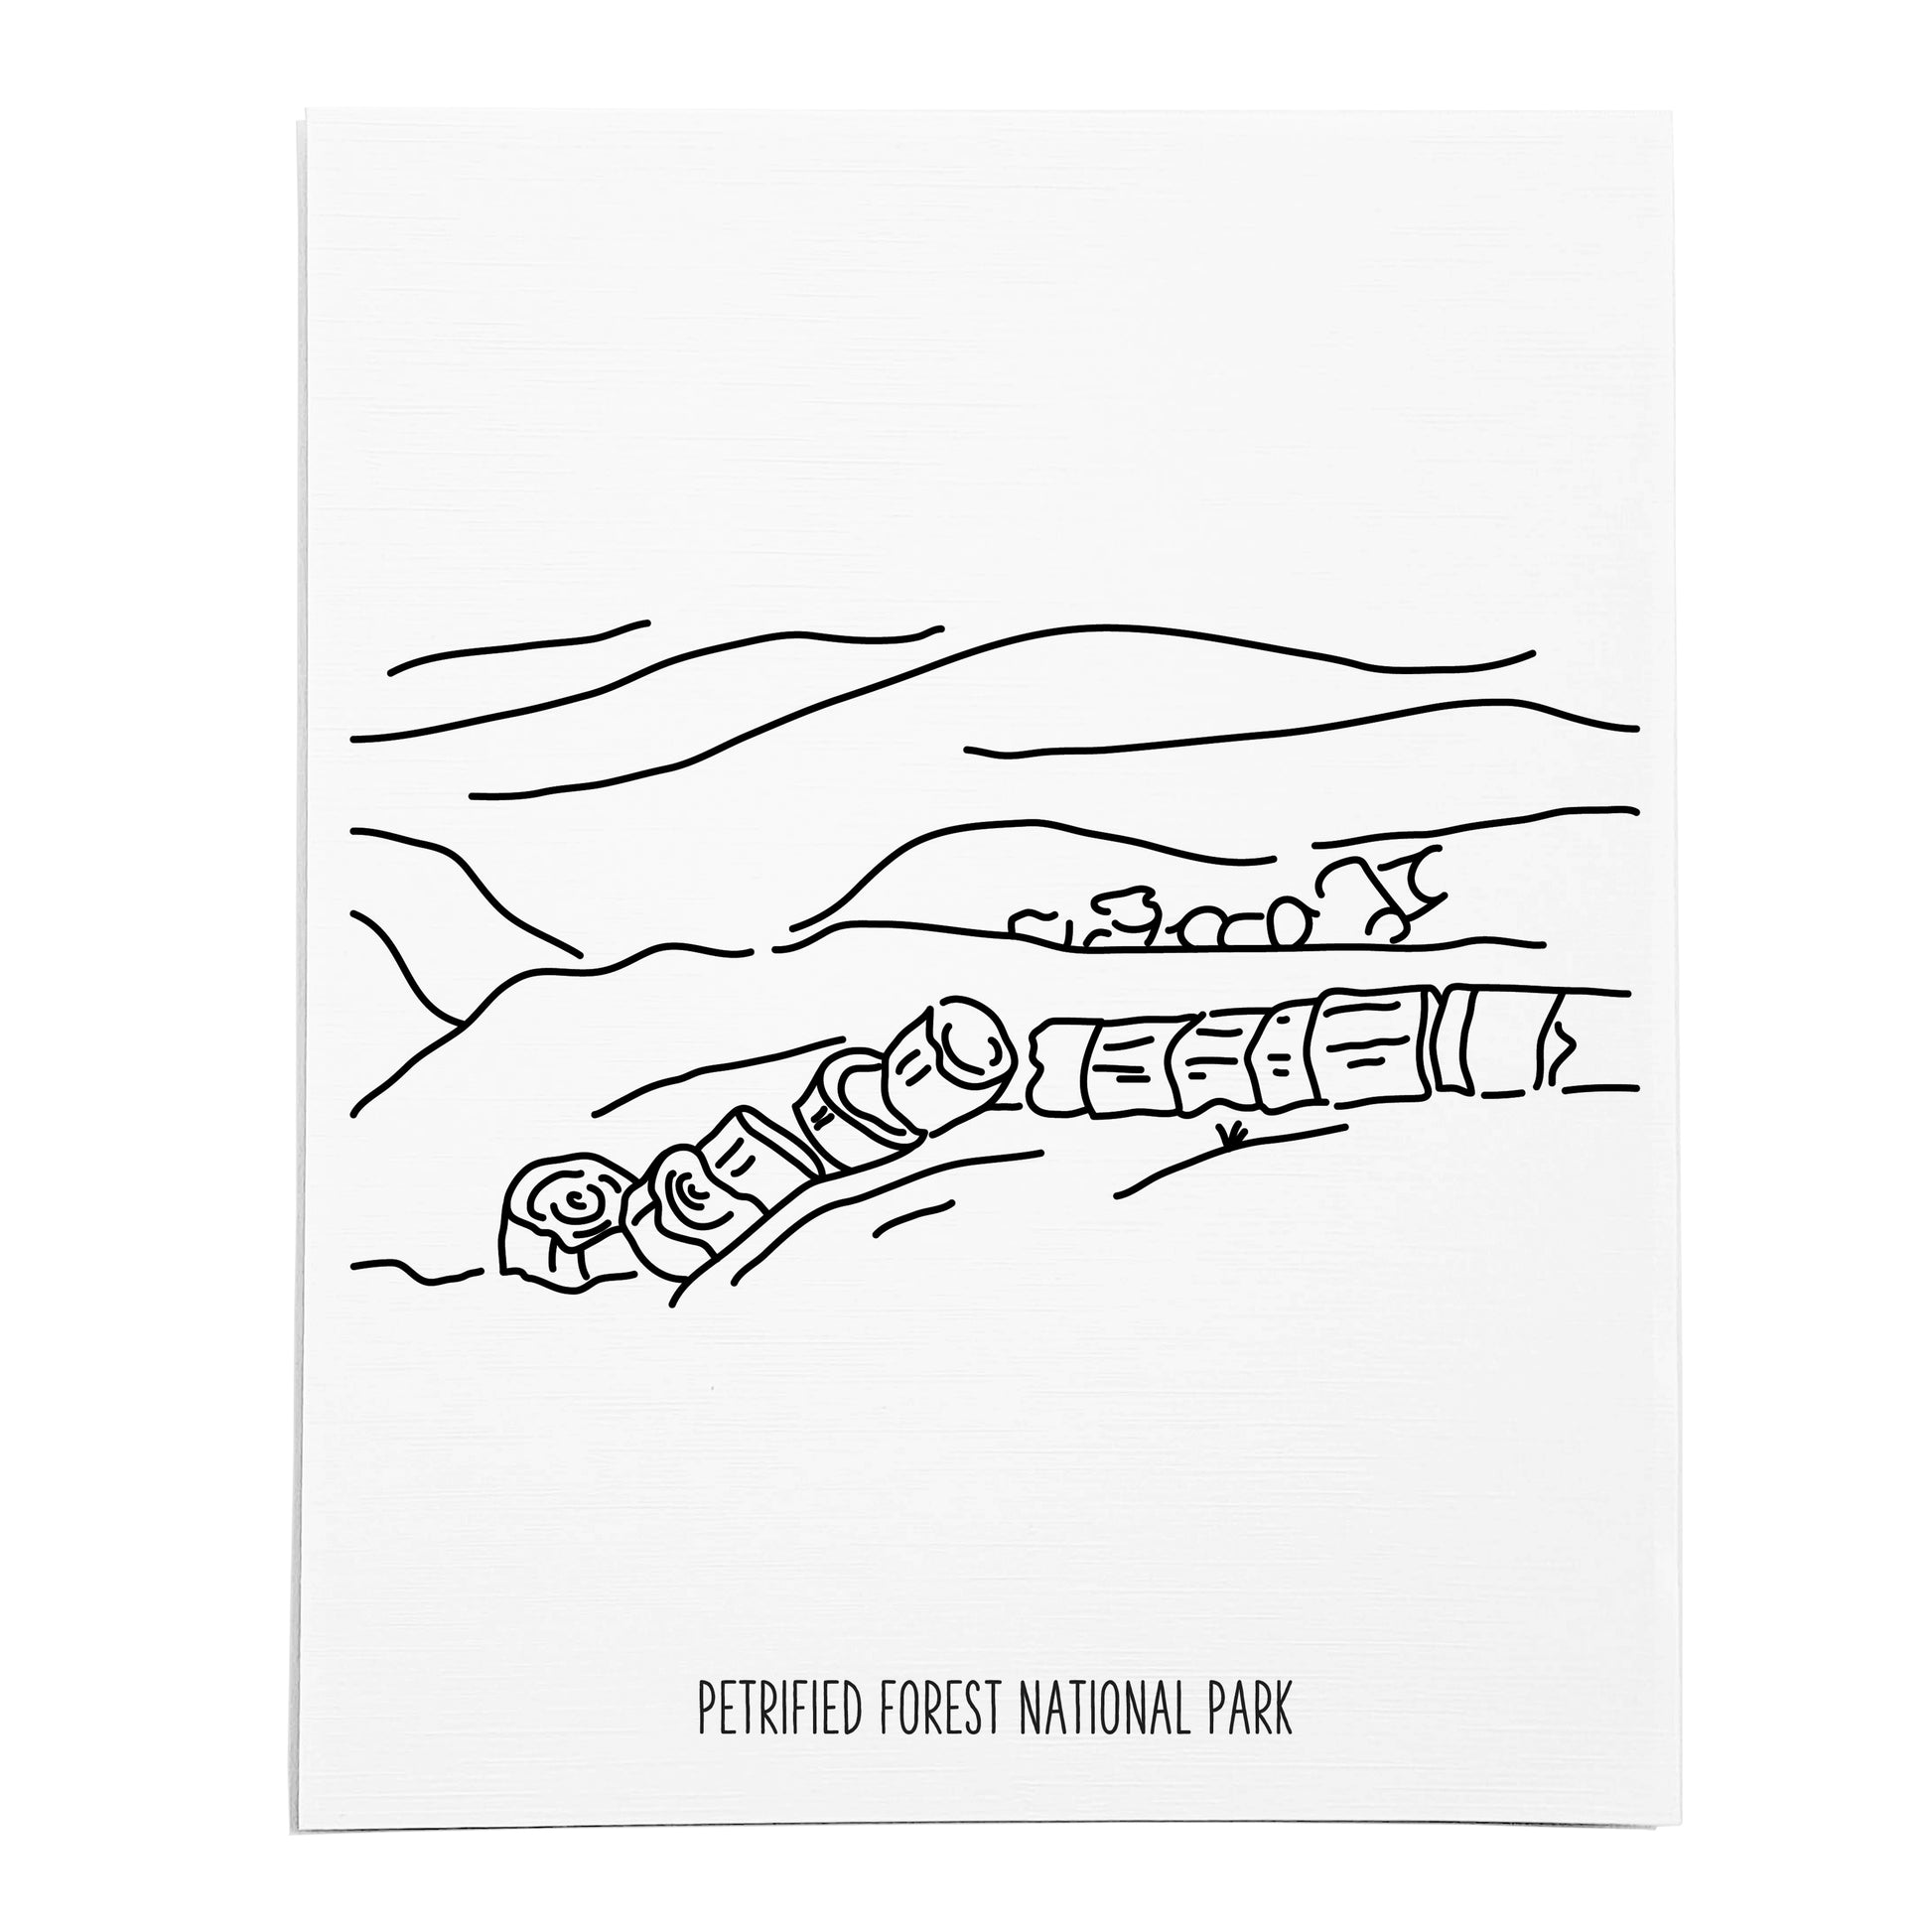 An art print featuring a line drawing of Petrified Forest National Park on white linen paper